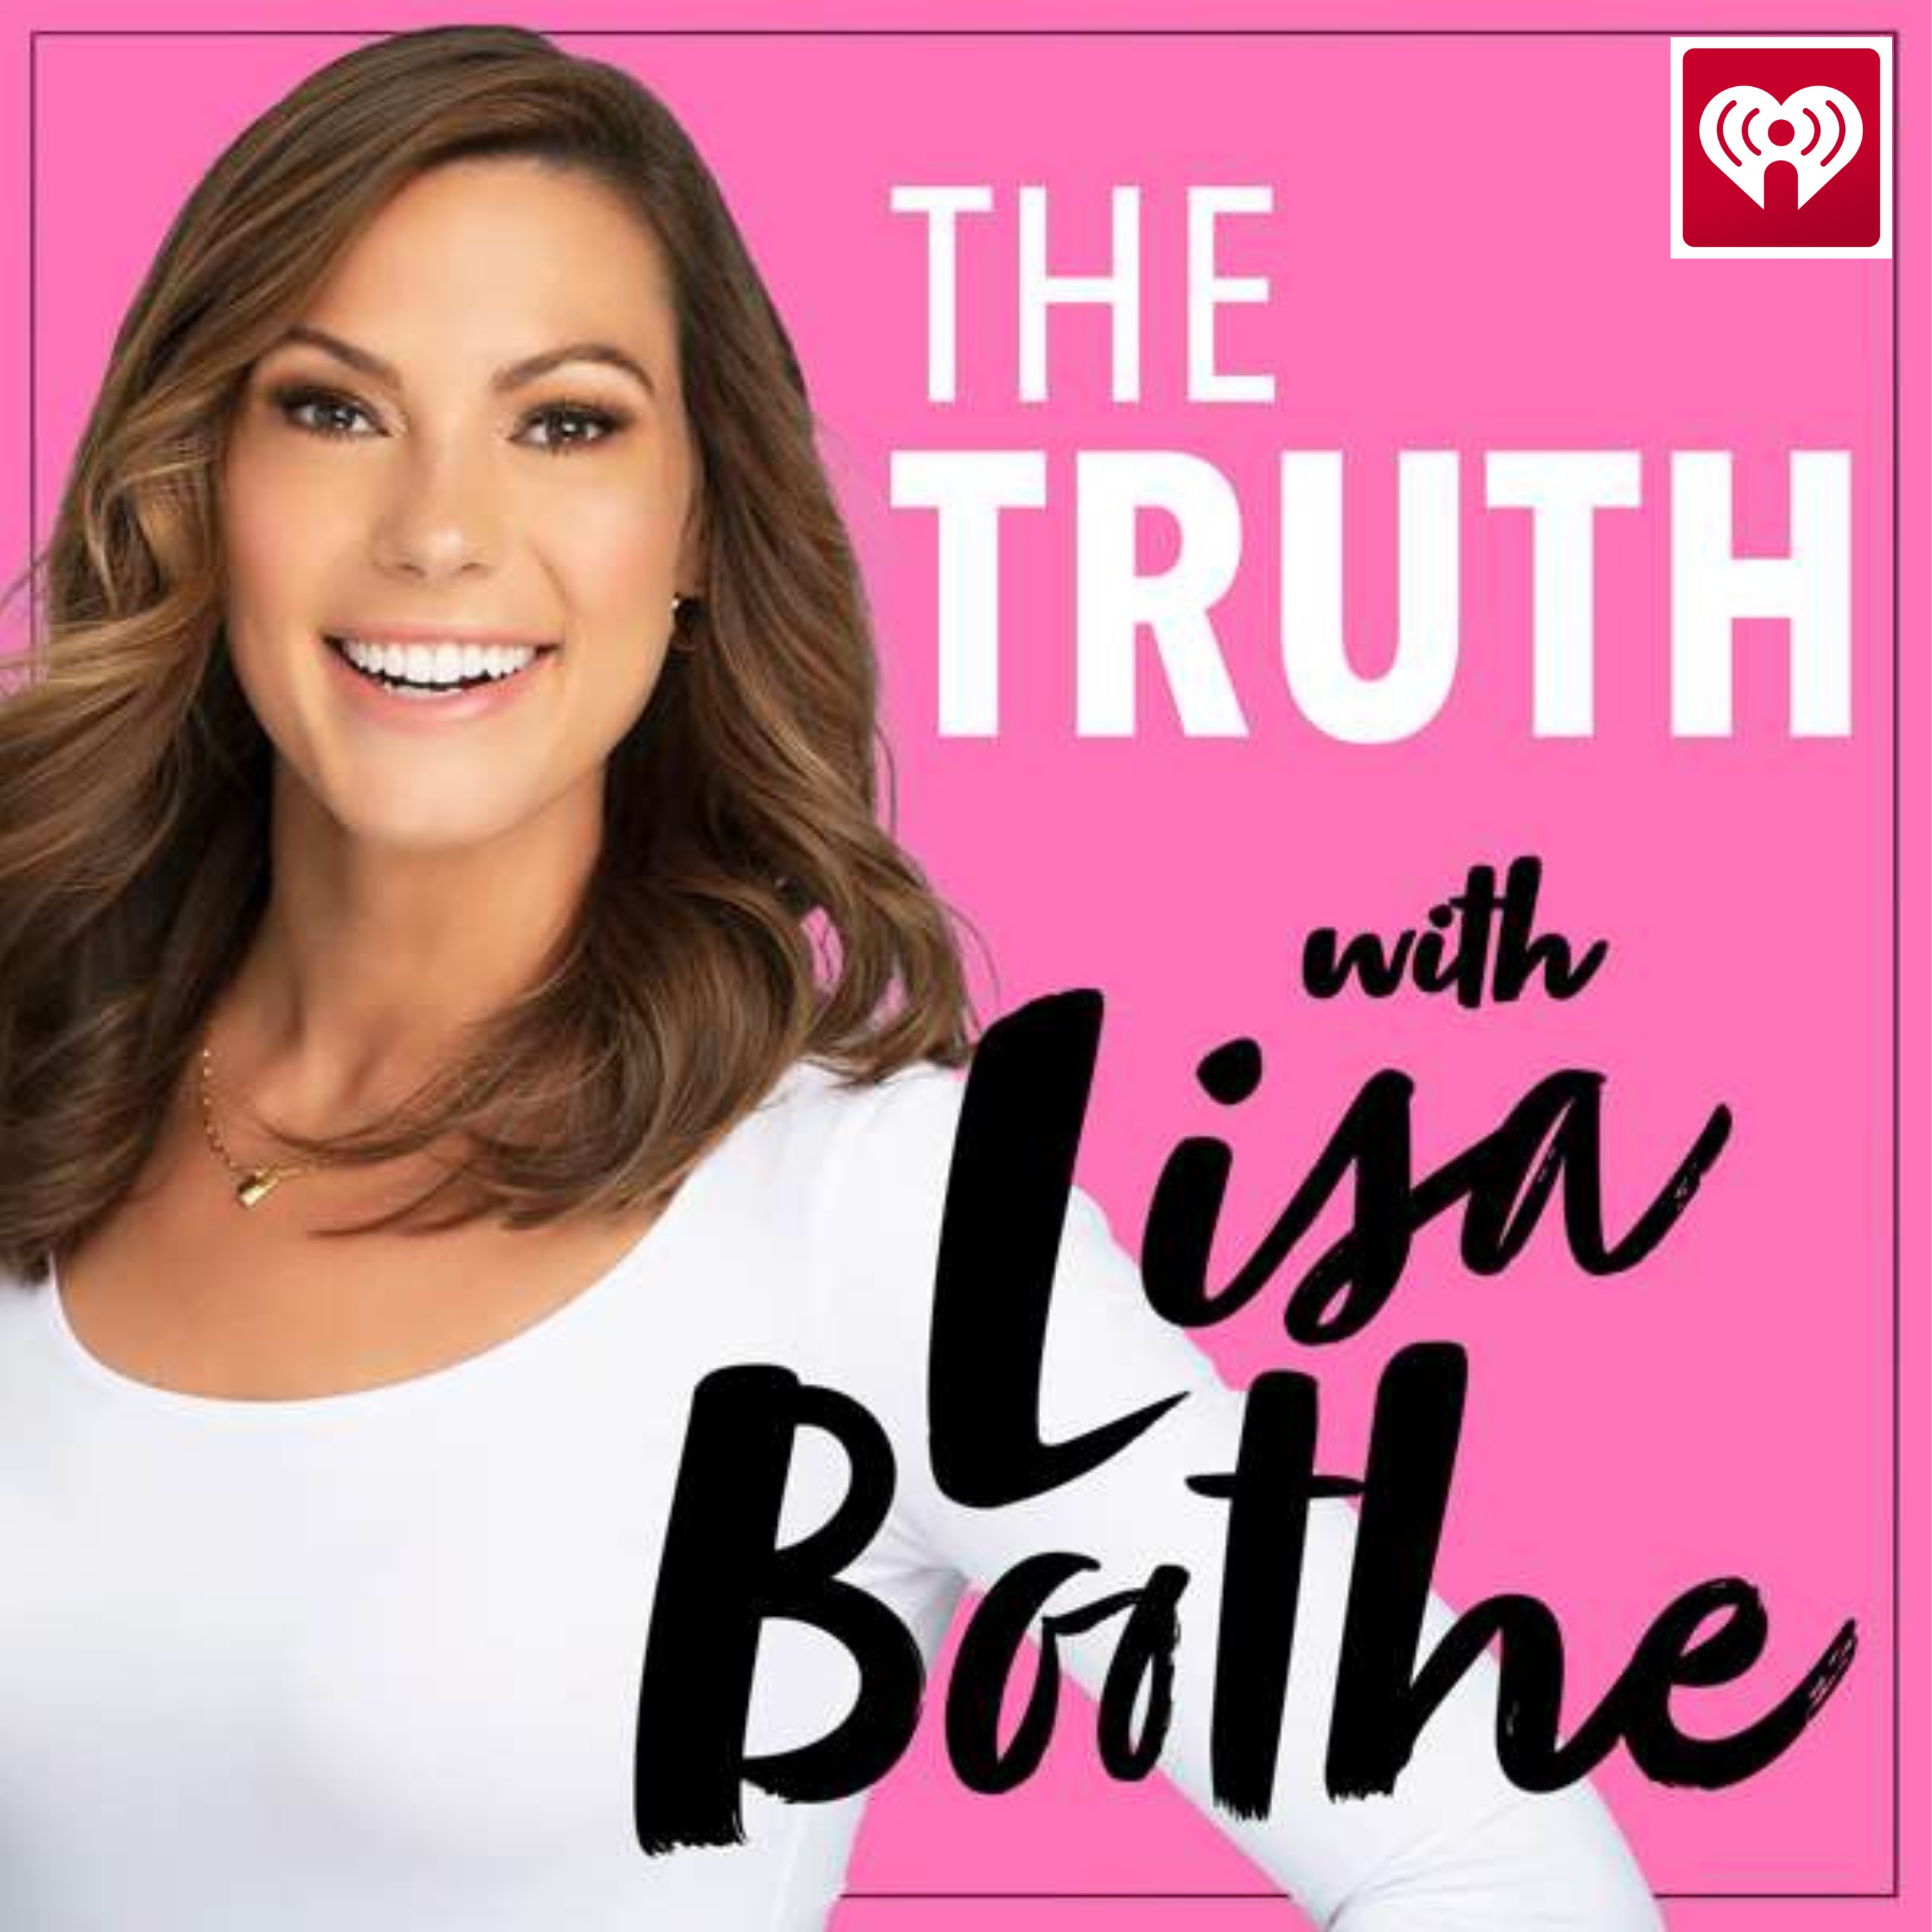 The Truth with Lisa Boothe: Shining the Light on the Darkness of Hollywood with Kirk Cameron